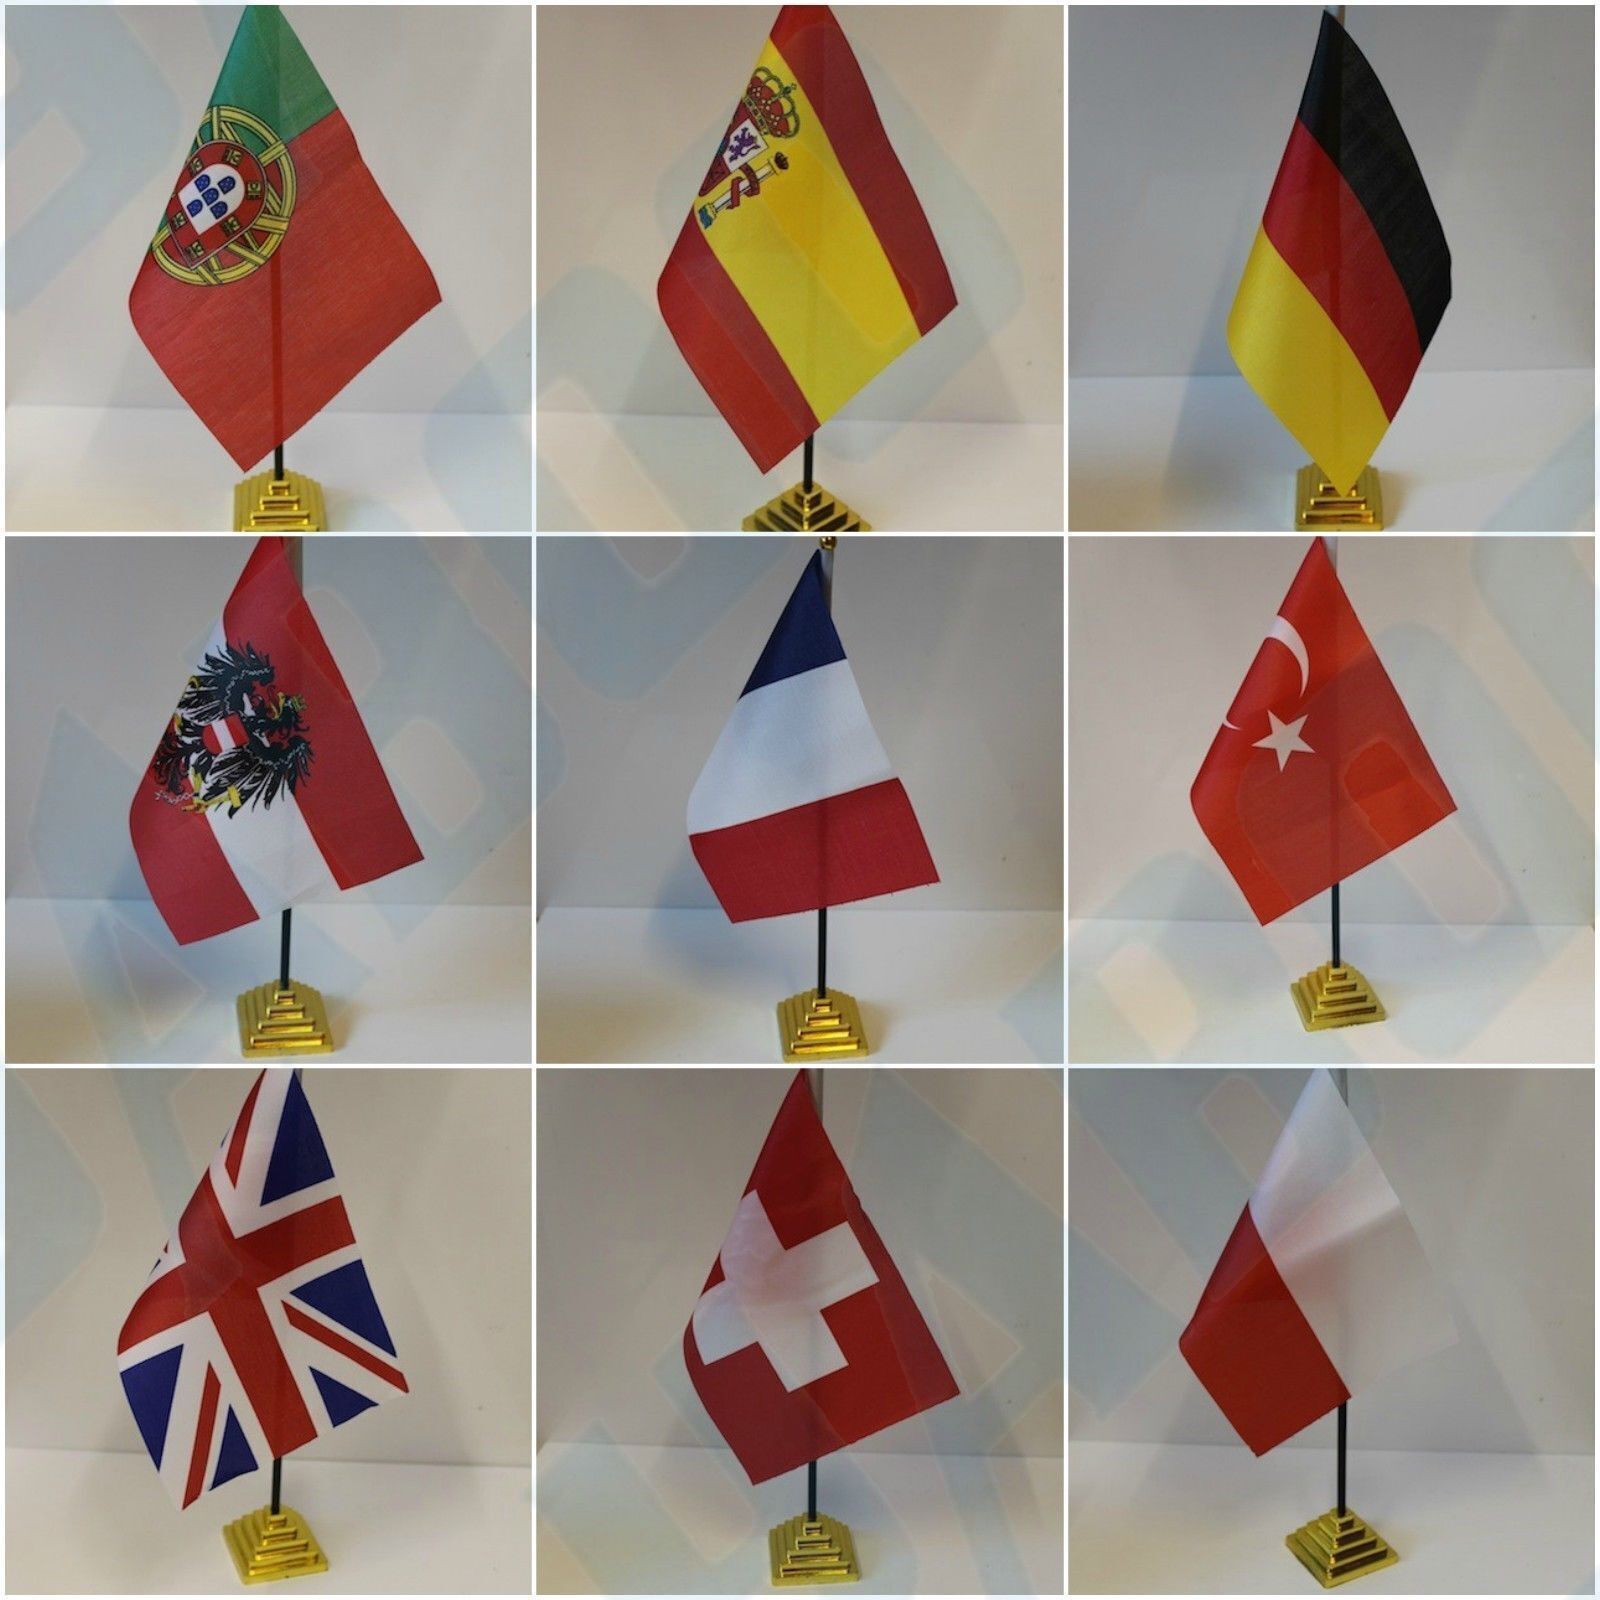 Country Table Desk Top Flags - UK, USA, RUSSIA, CHINA, TURKEY, BRAZIL....